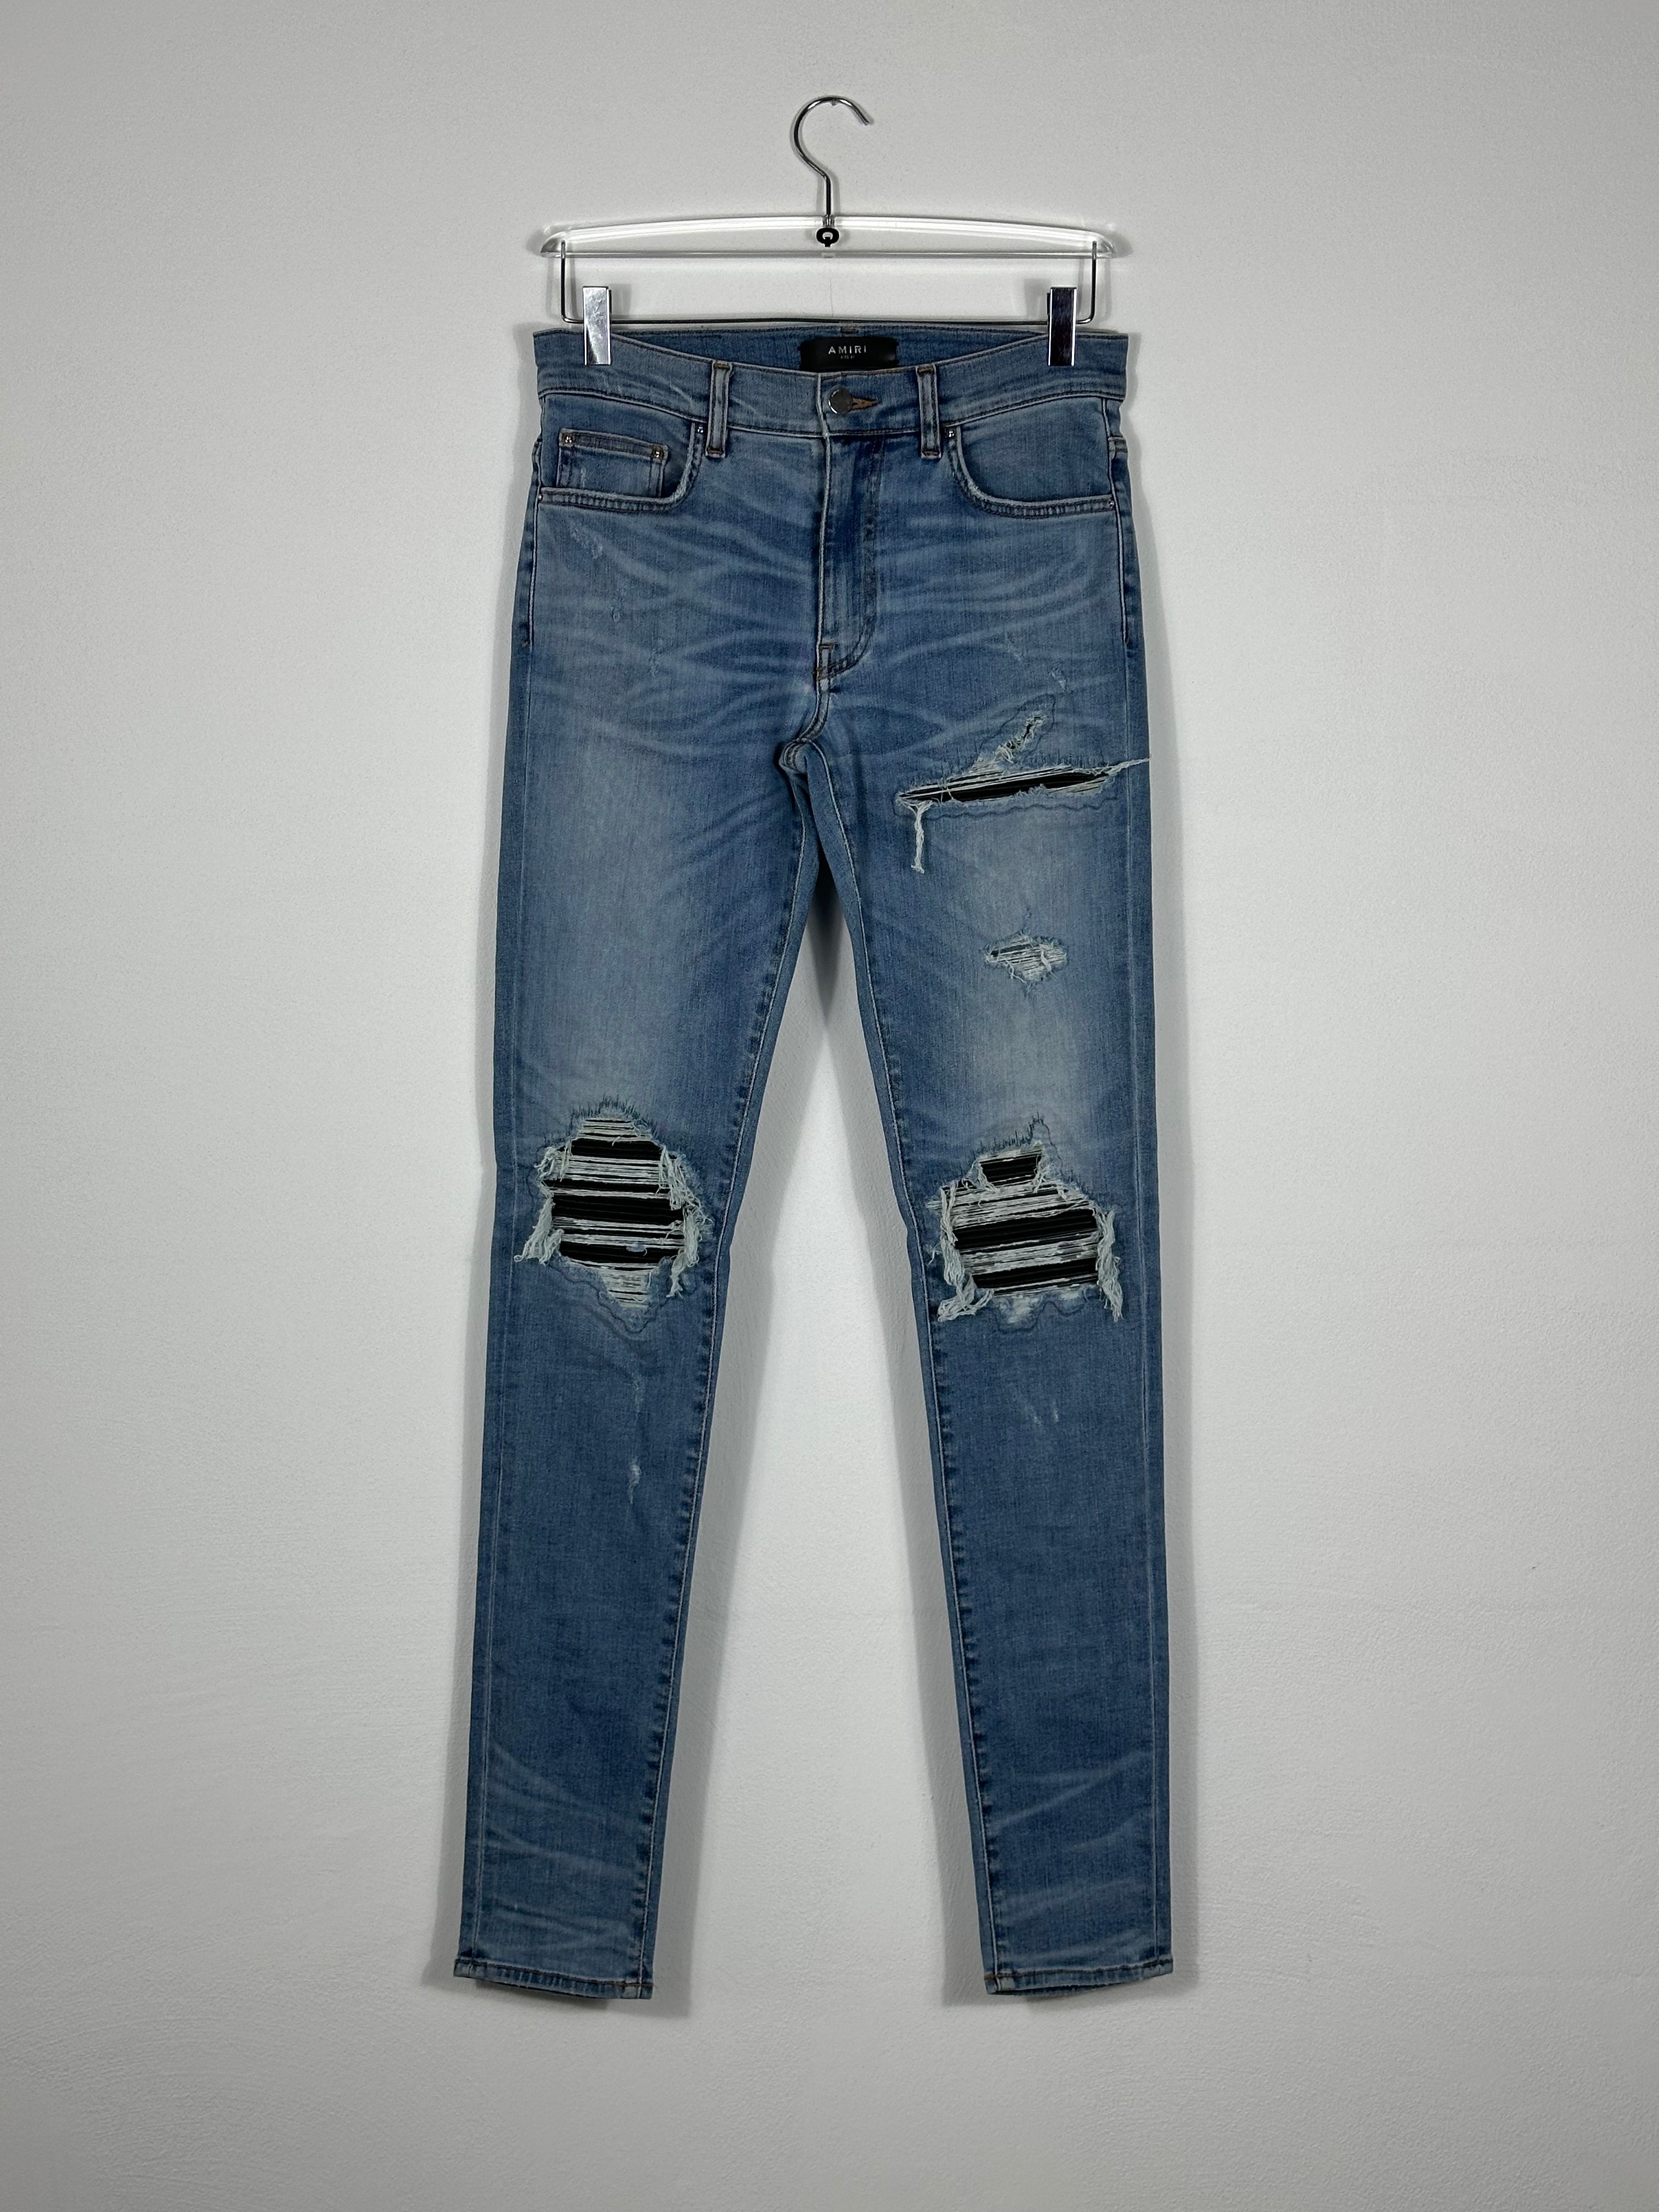 Jeans With Patches by Sfera Ebbasta